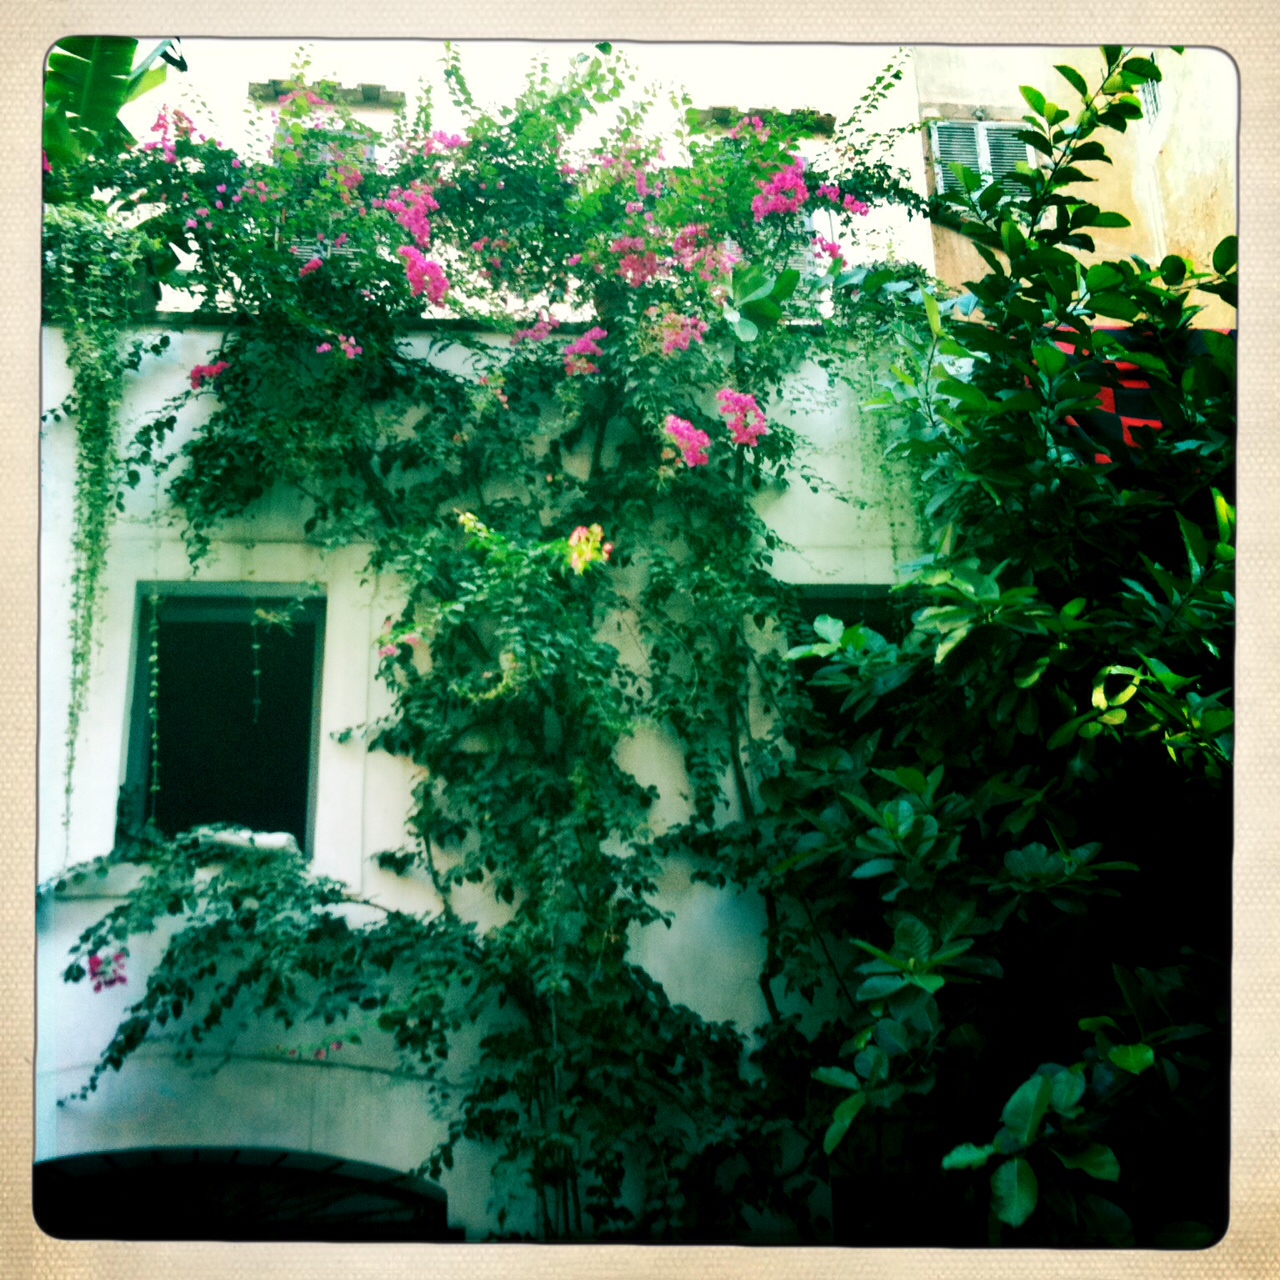 vines, bushes and flowers cover a building with windows